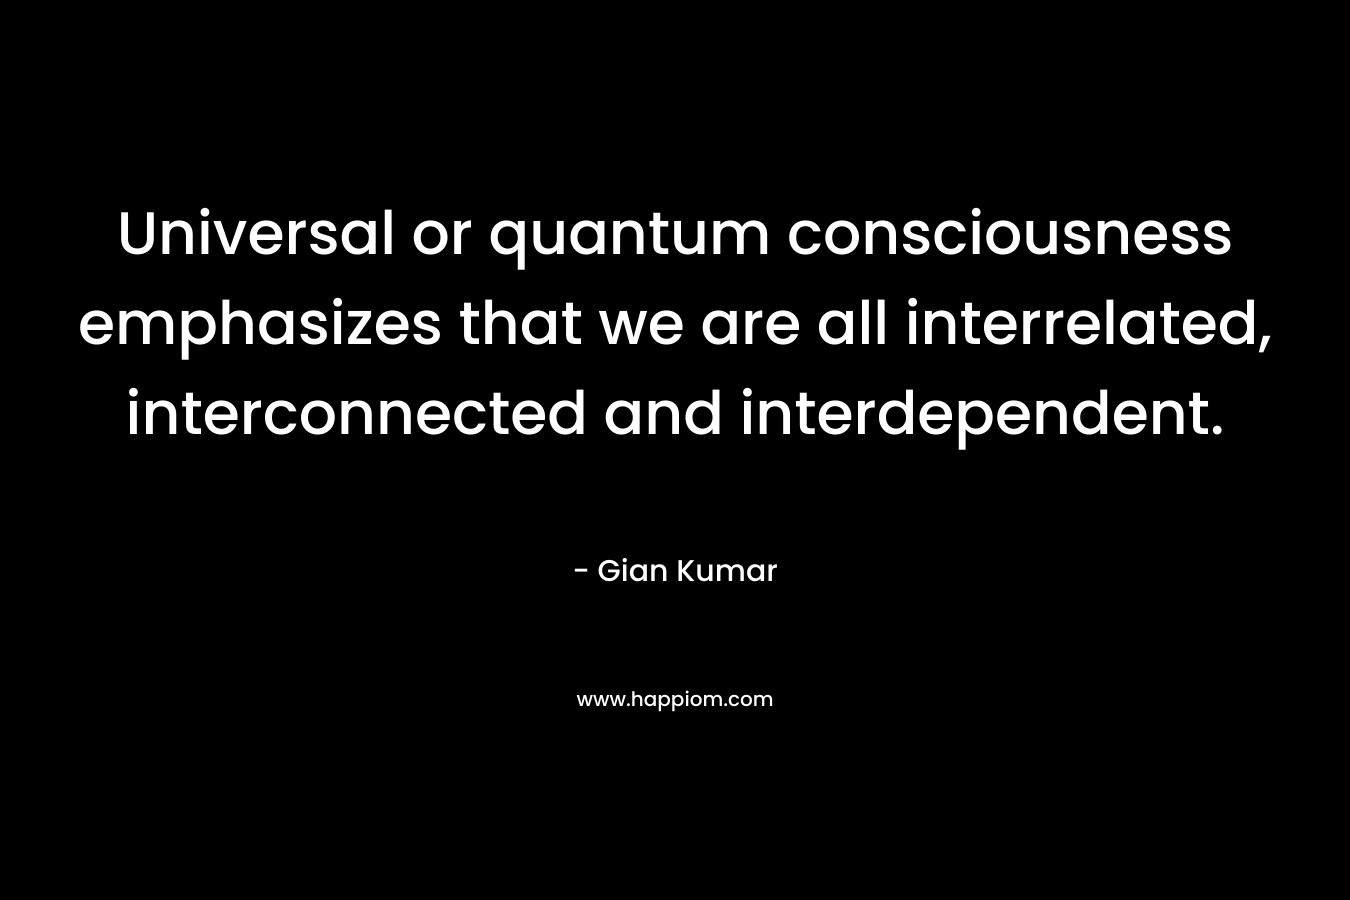 Universal or quantum consciousness emphasizes that we are all interrelated, interconnected and interdependent. – Gian Kumar